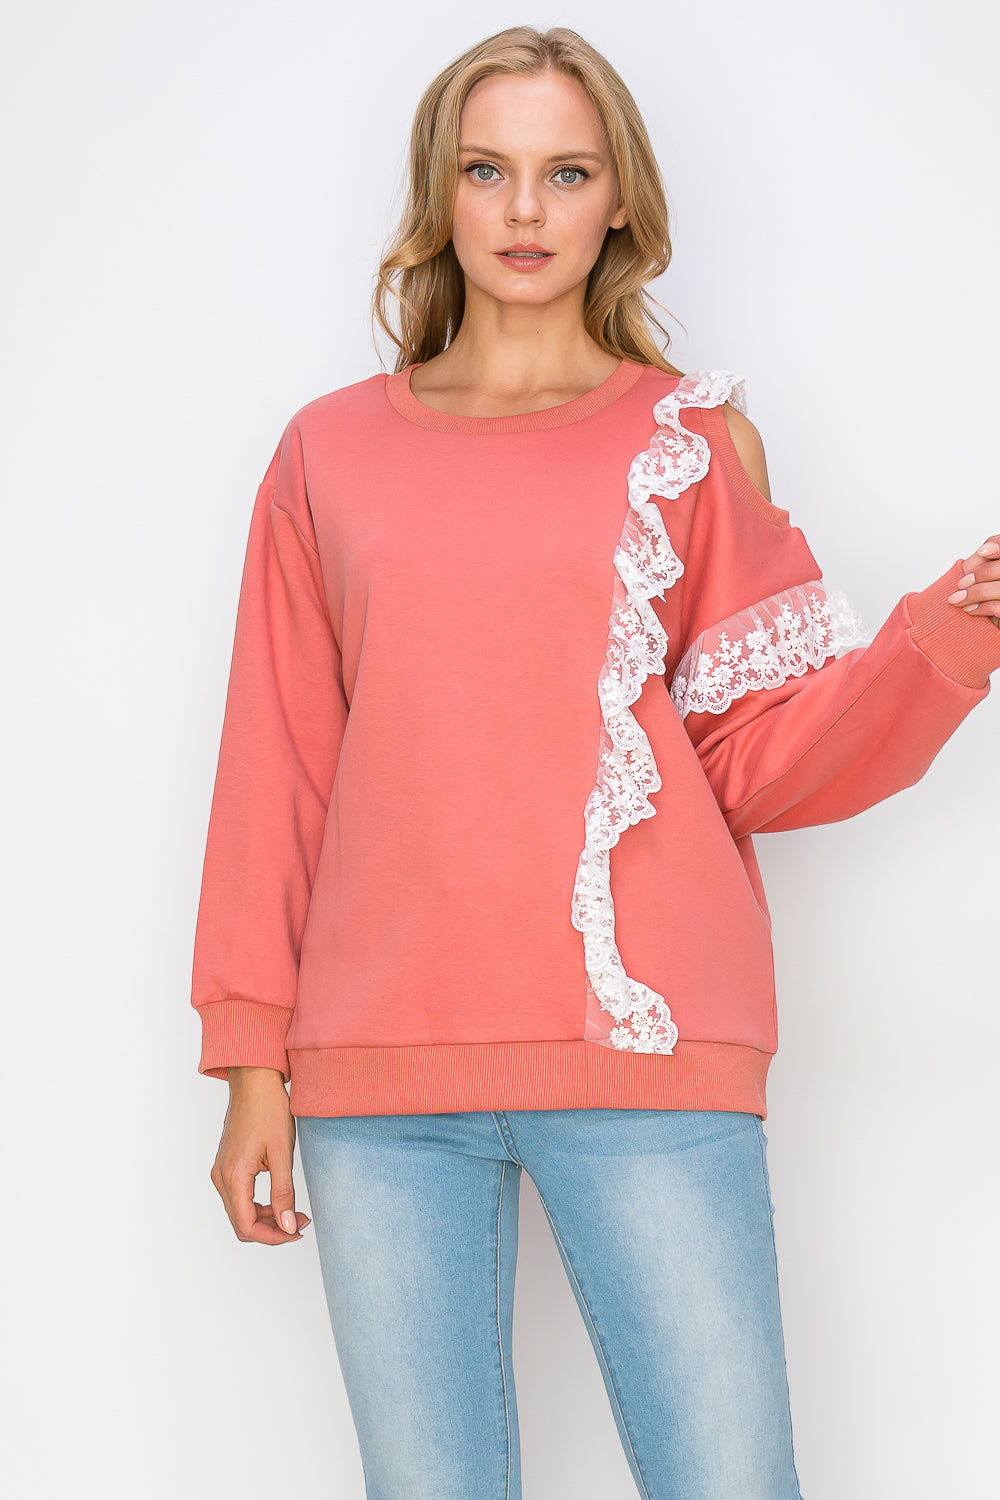 Kylie Prima Cotton Top with One-Side Open Shoulder Lace